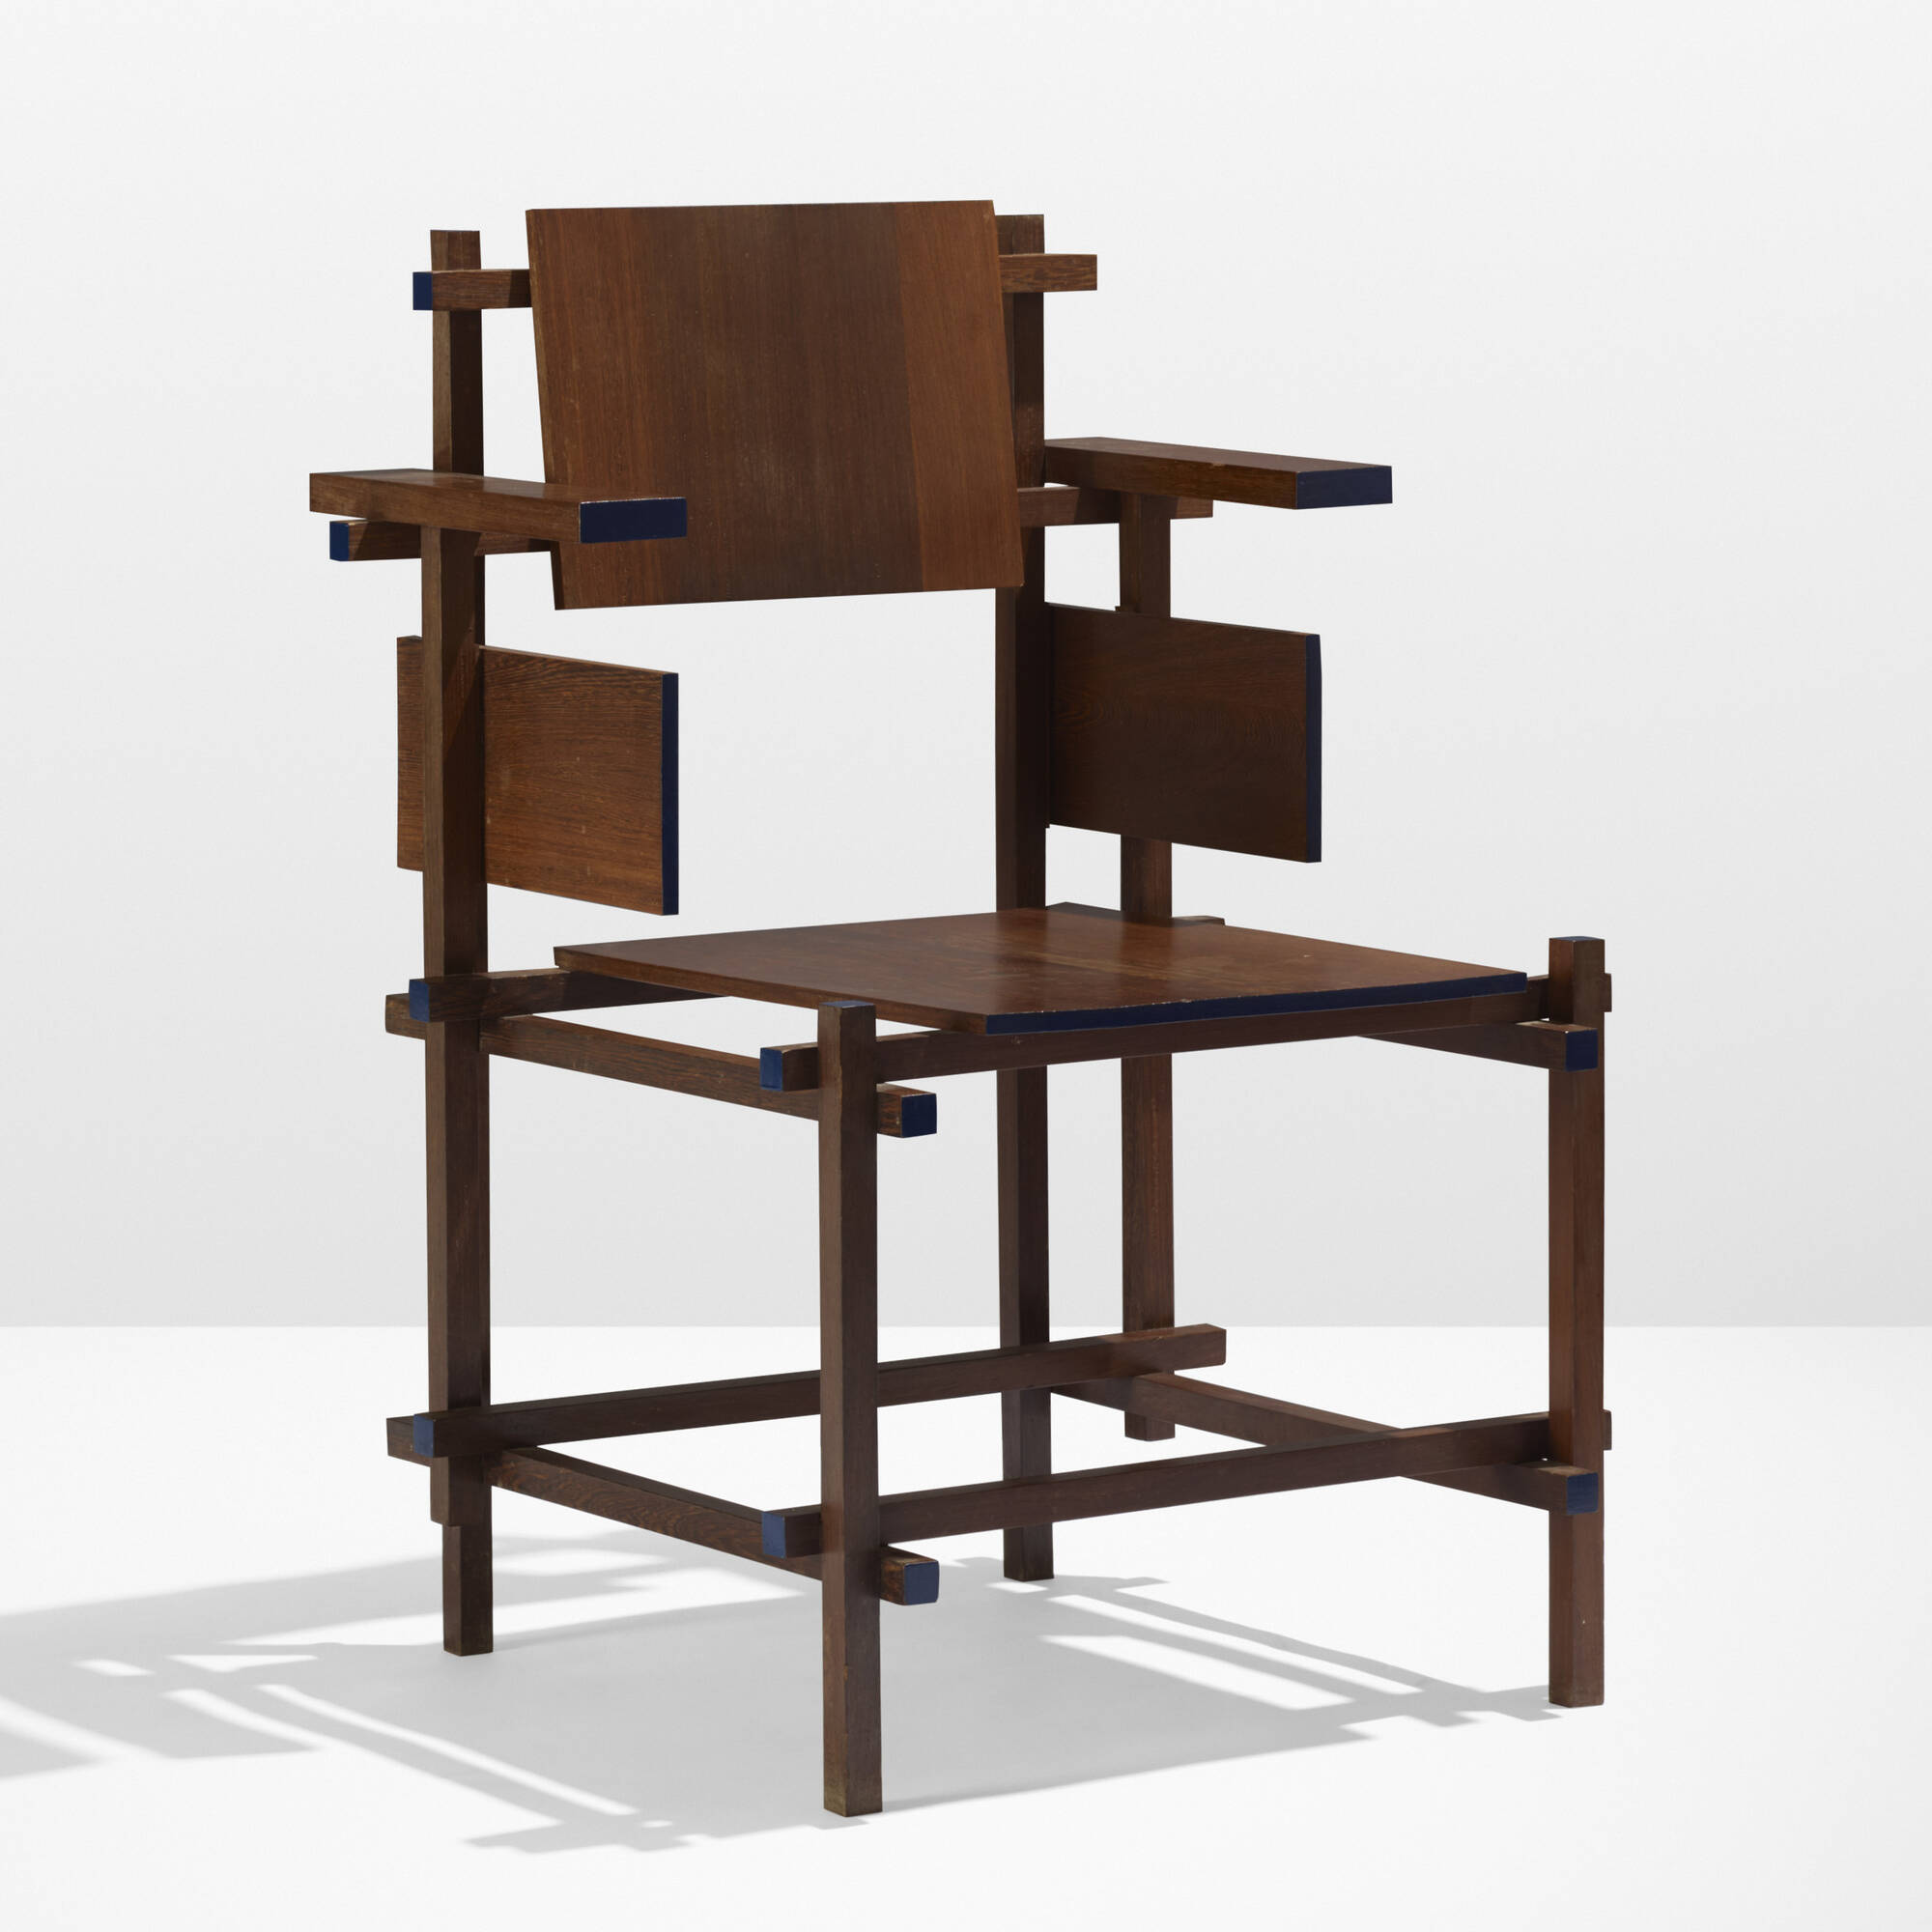 Floreren vergeten Knorretje 107: GERRIT RIETVELD, Hoge Stoel < International Style: The Boyd  Collection, 7 November 2019 < Auctions | Wright: Auctions of Art and Design